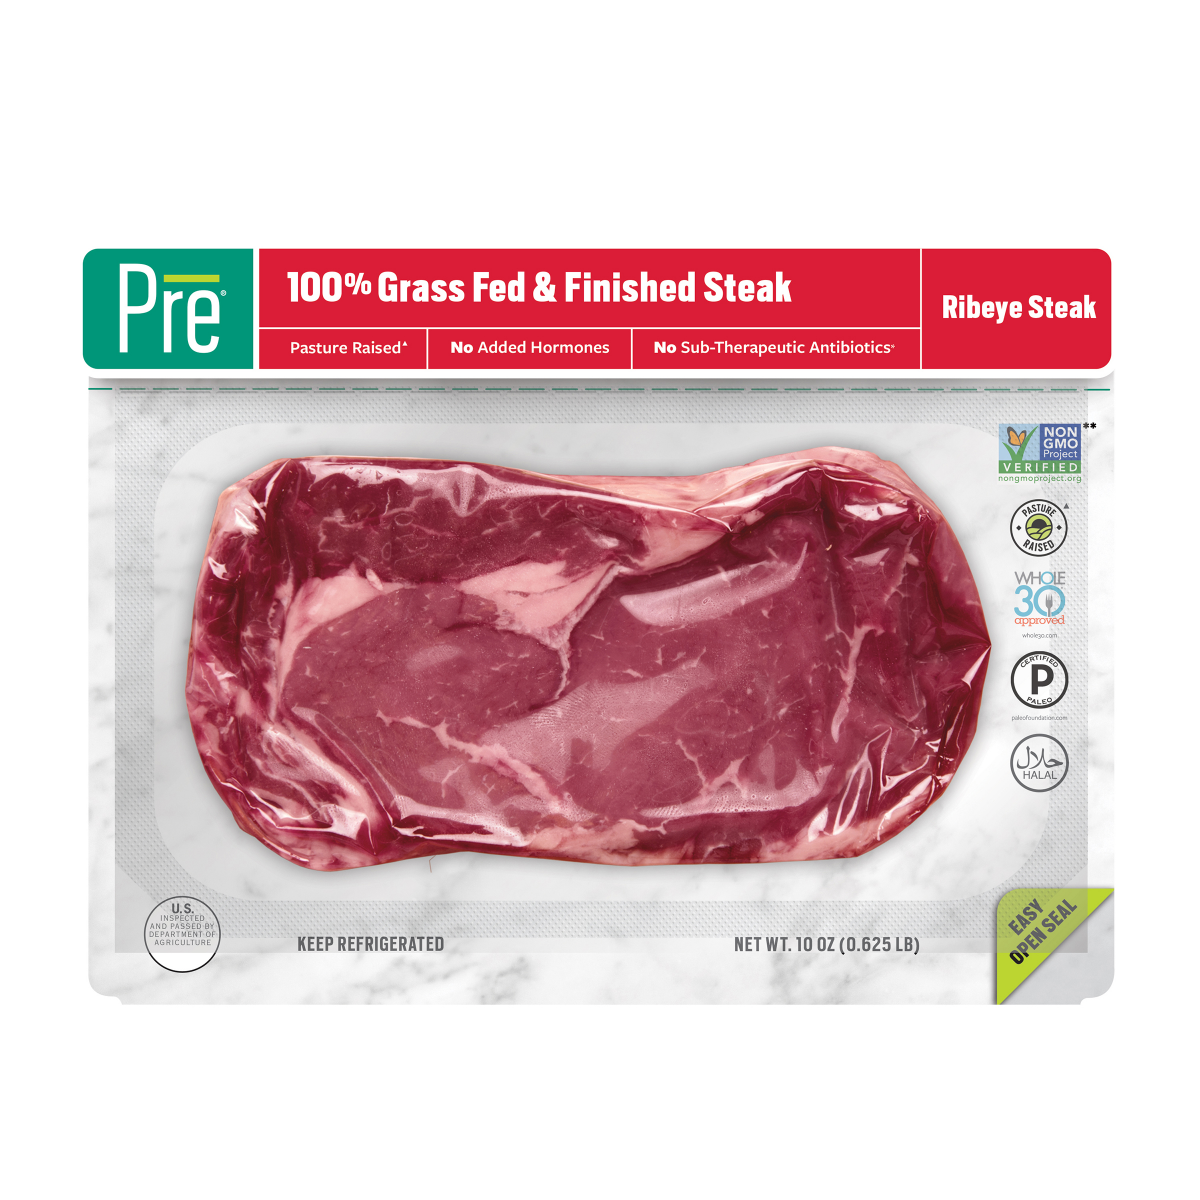 slide 1 of 19, Pre, Ribeye Steak  100% Grass-Fed, Grass-Finished, and Pasture-Raised Beef 10oz., 10 oz